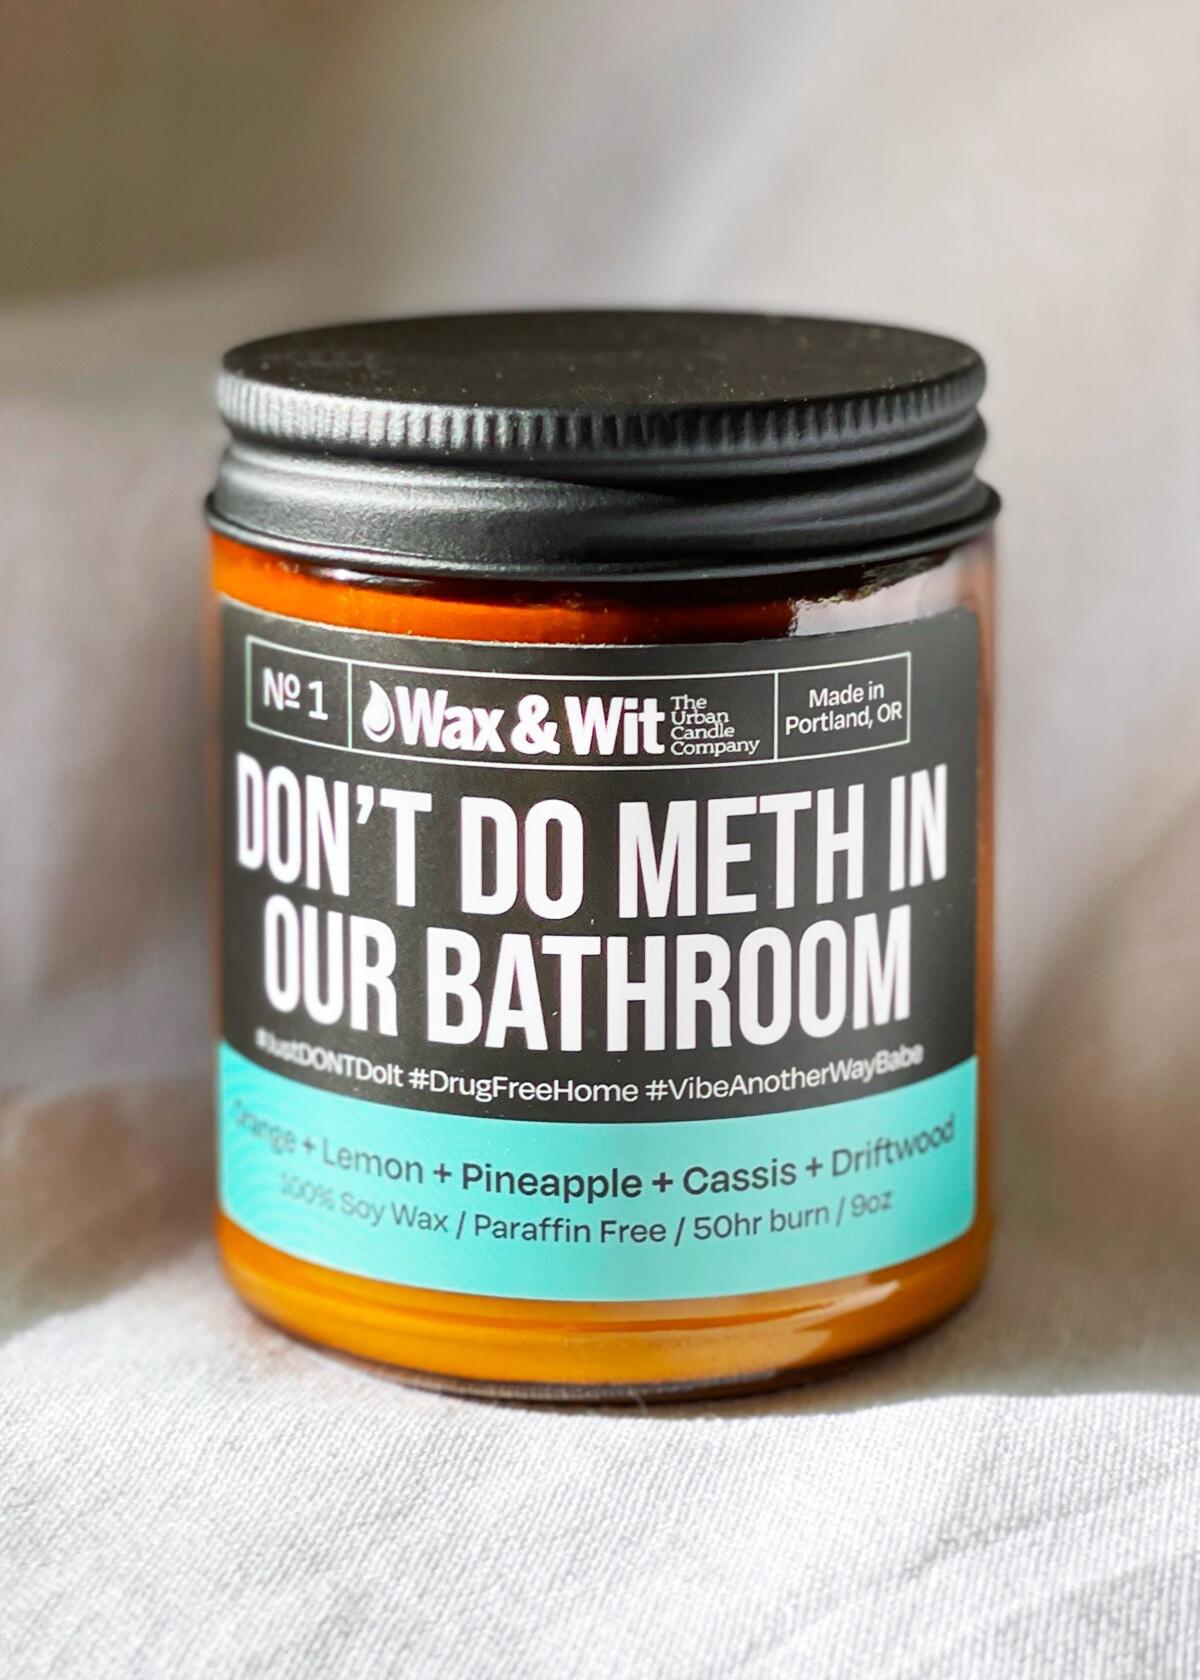 A candle in an amber screw-top jar with a label that reads "Don't do meth in our bathroom."